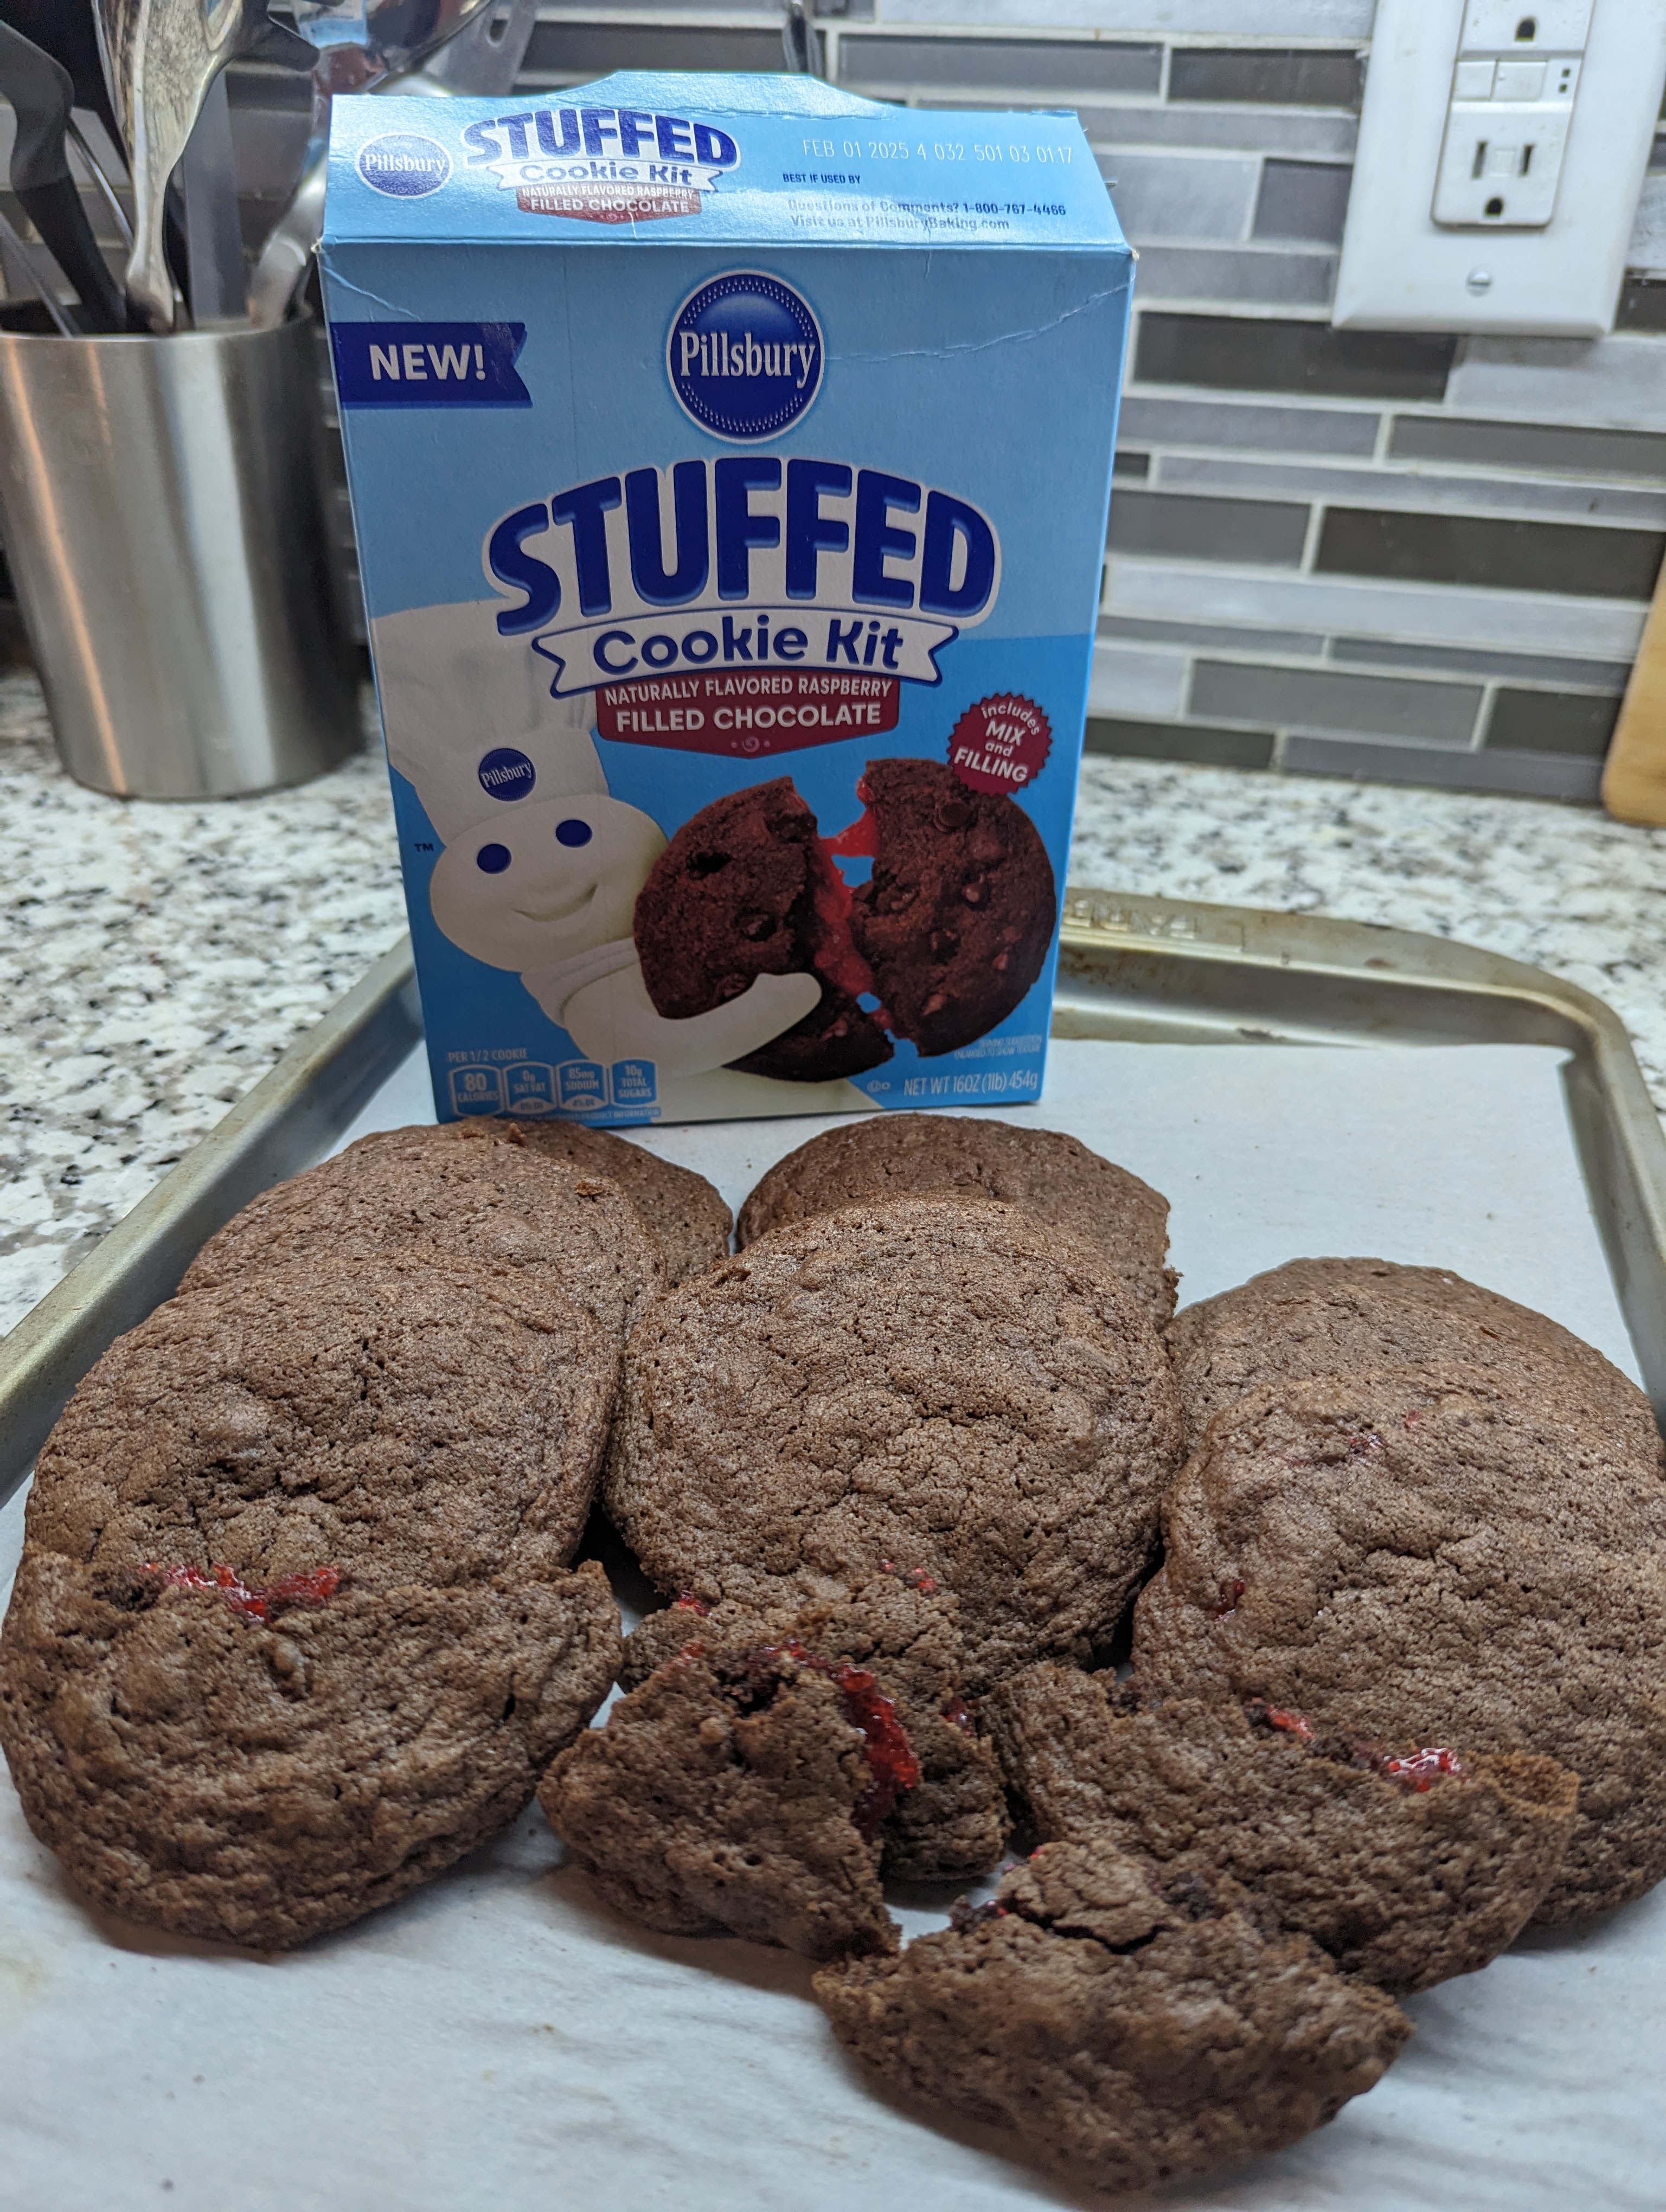 Testing out Pillsbury’s STUFFED cookie kit, Raspberry filled chocolate cookies